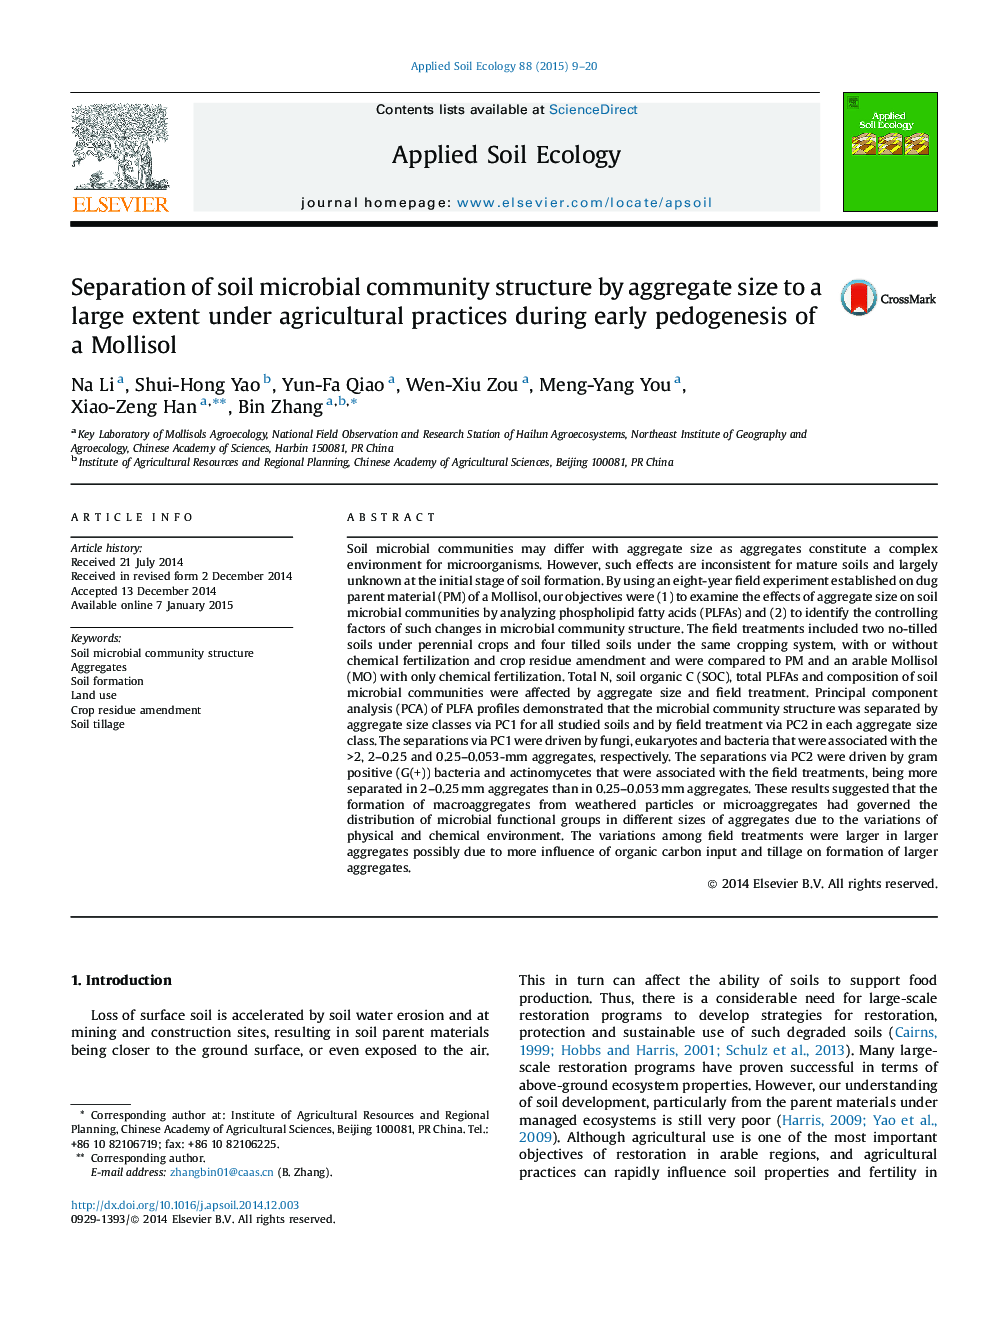 Separation of soil microbial community structure by aggregate size to a large extent under agricultural practices during early pedogenesis of a Mollisol